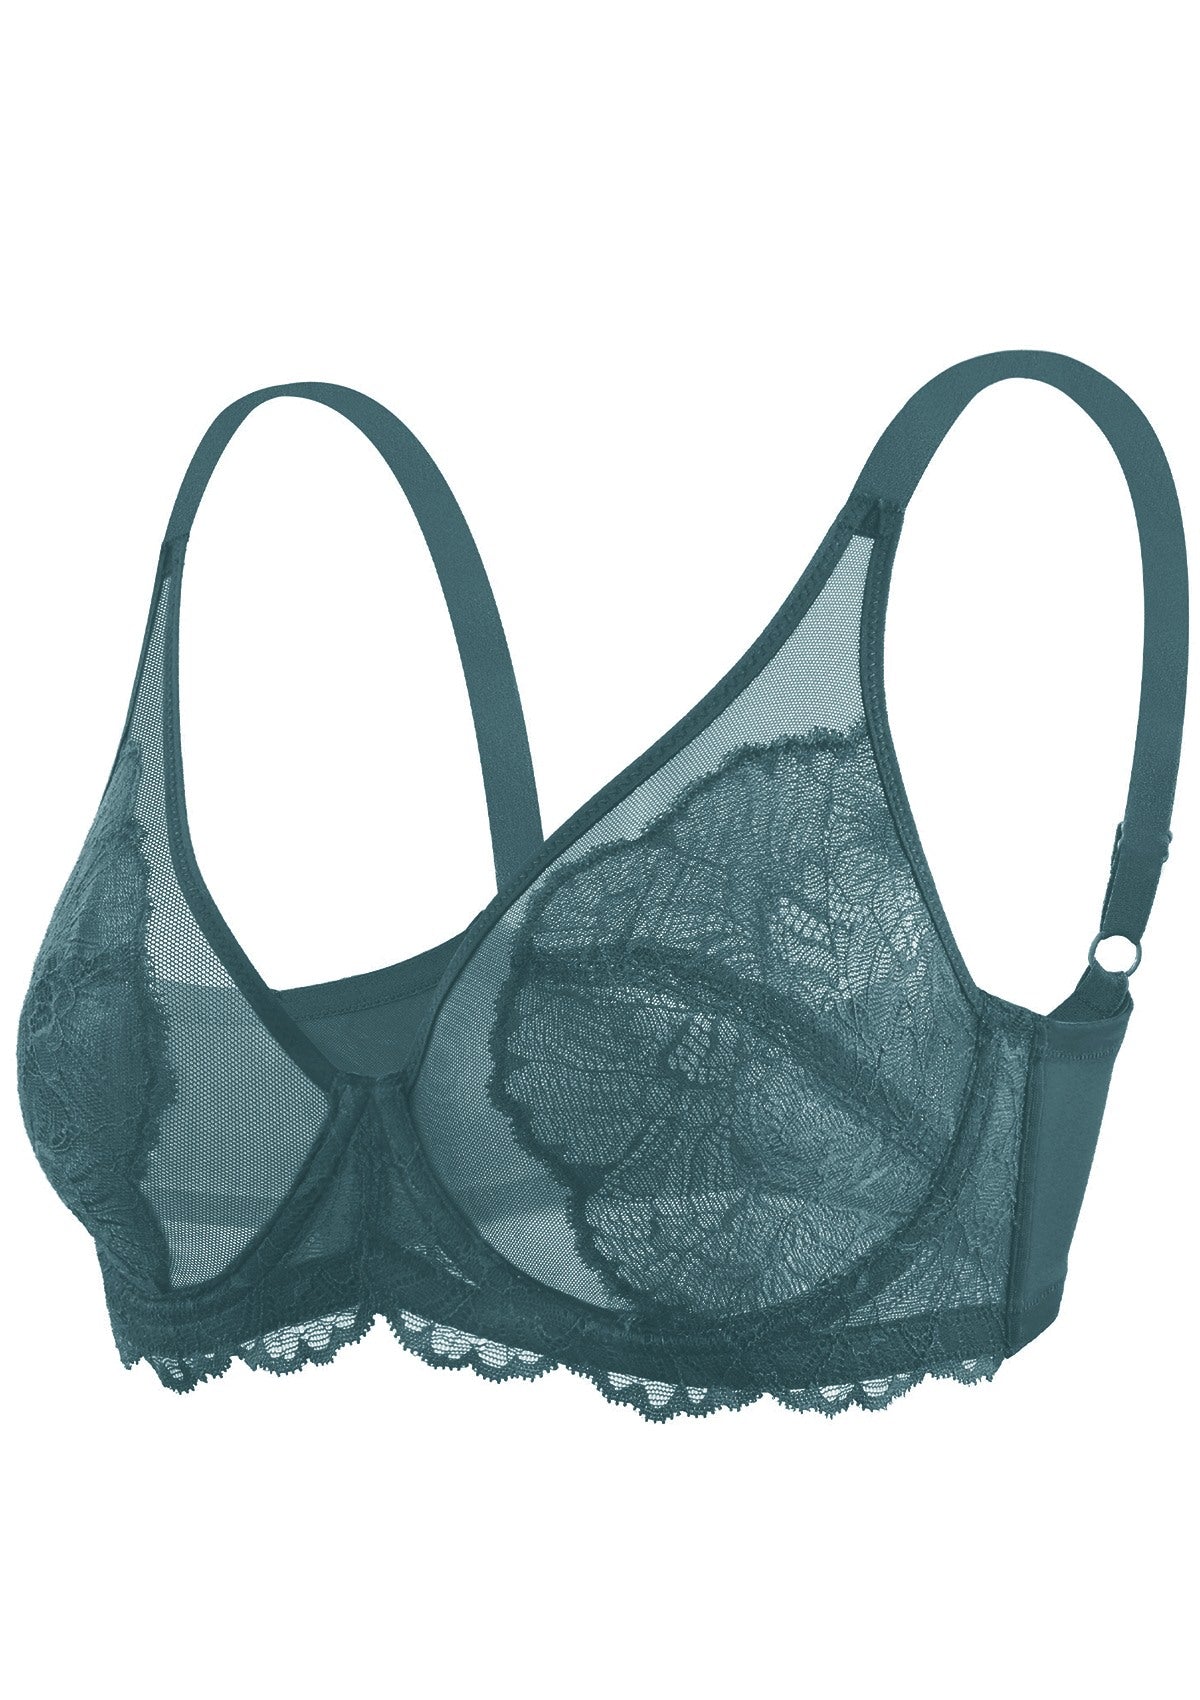 HSIA Blossom Full Figure See-Through Lace Bra For Side And Back Fat - Balsam Blue / 40 / DDD/F